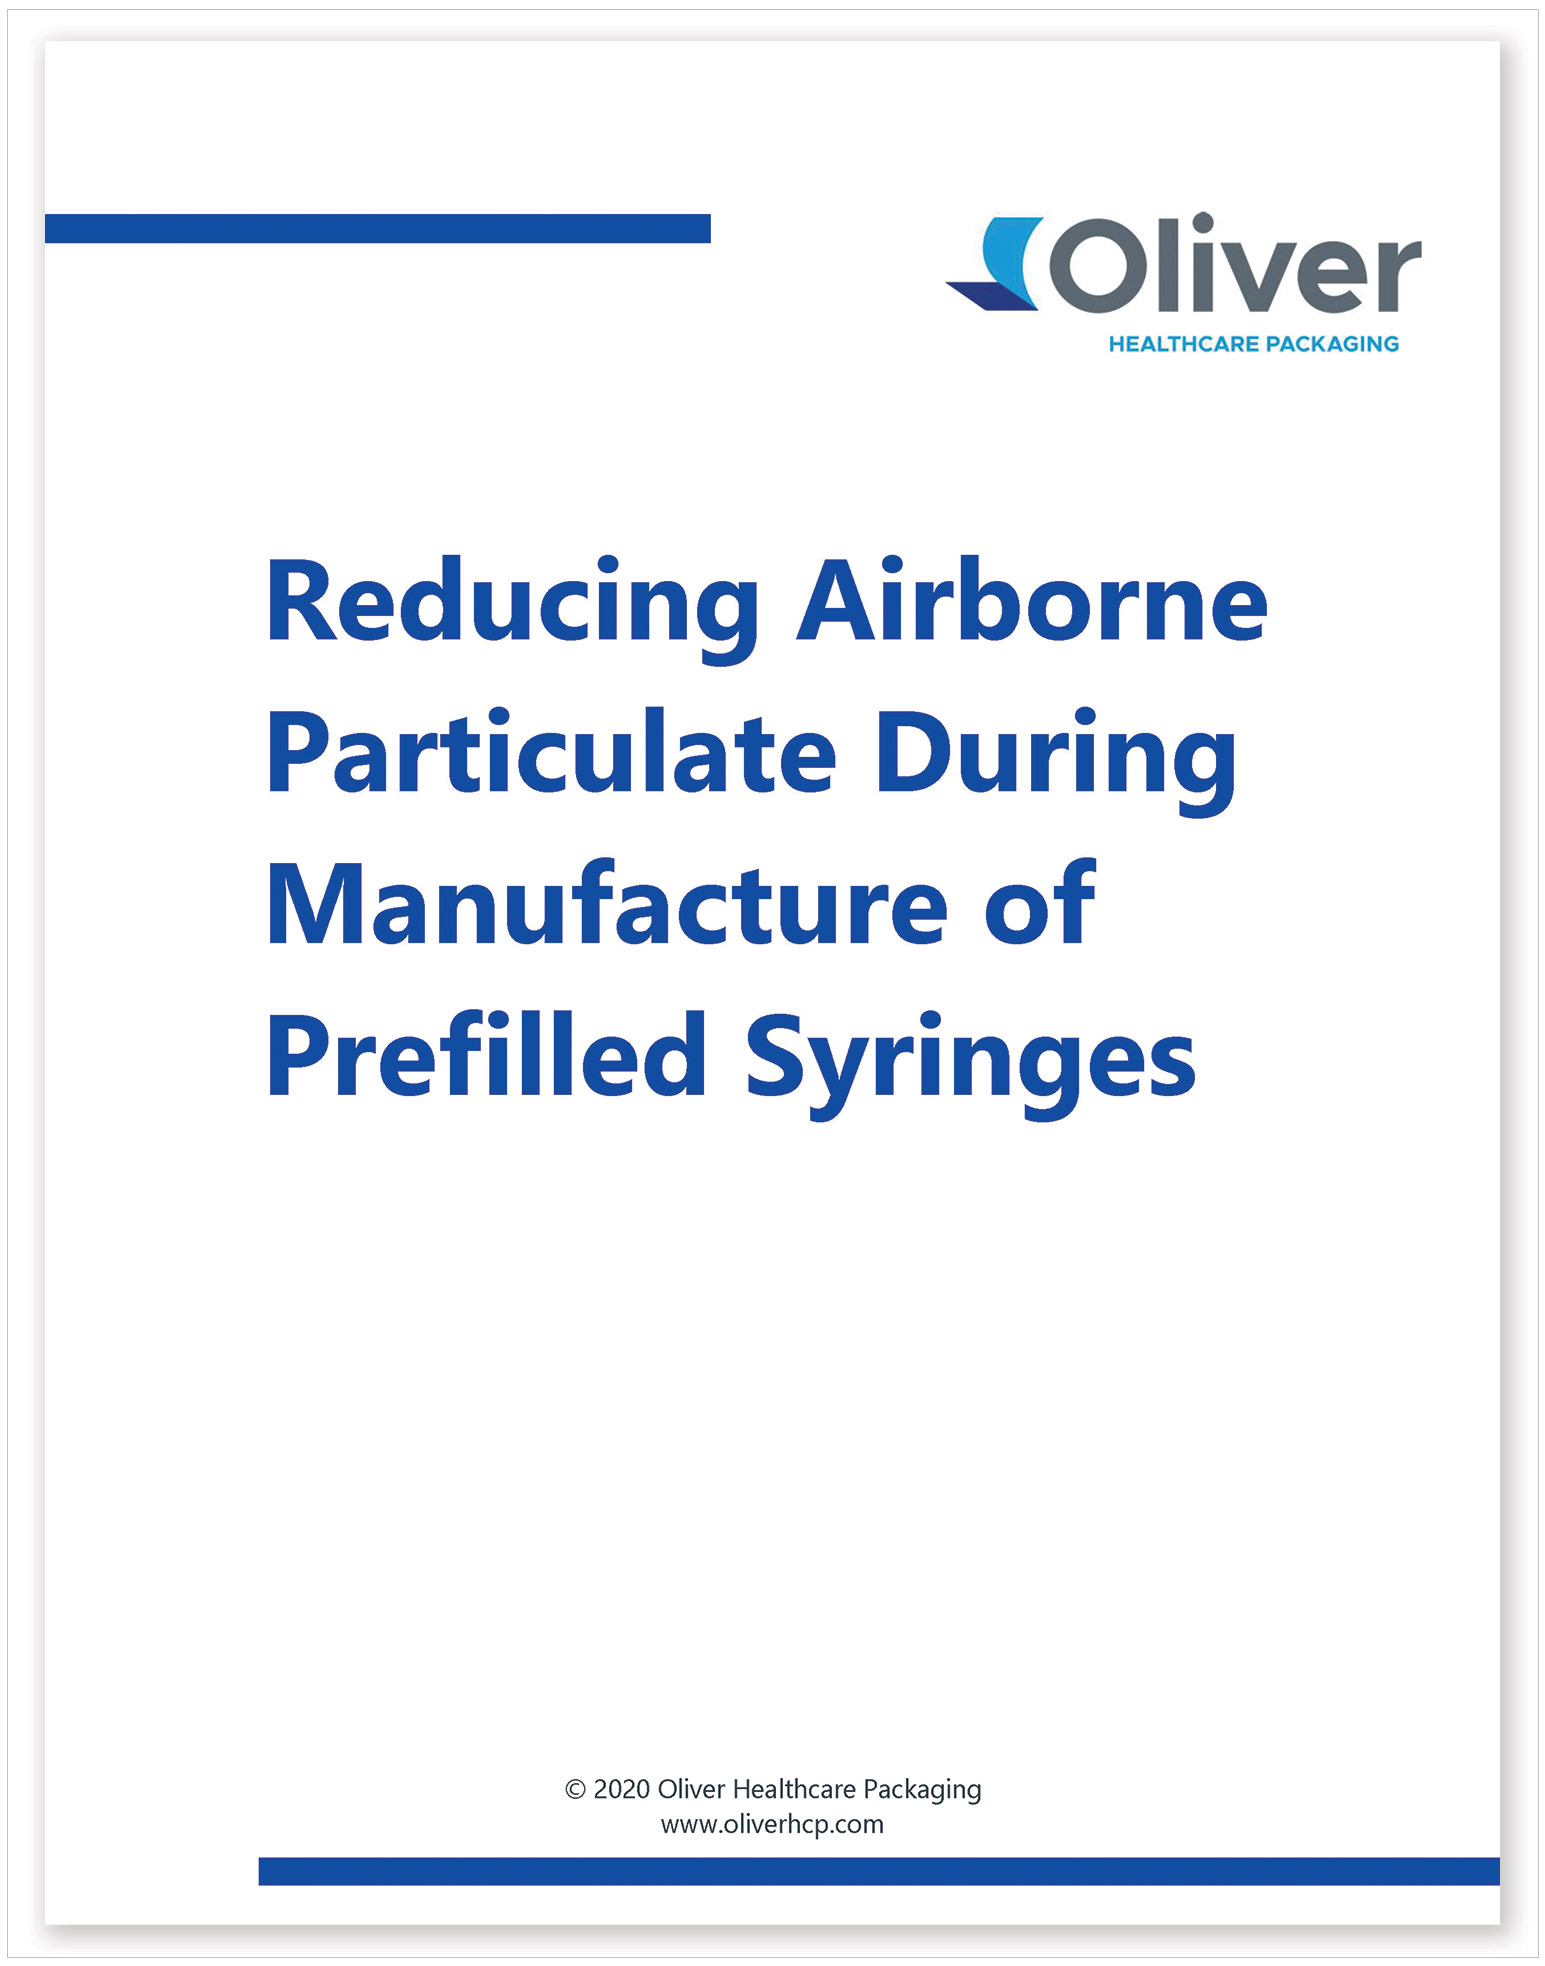 Oliver-HCP_Reducing-Airborne-Particulate-During-Manufacture-of-Prefilled-Syringes-Dec-2020_img